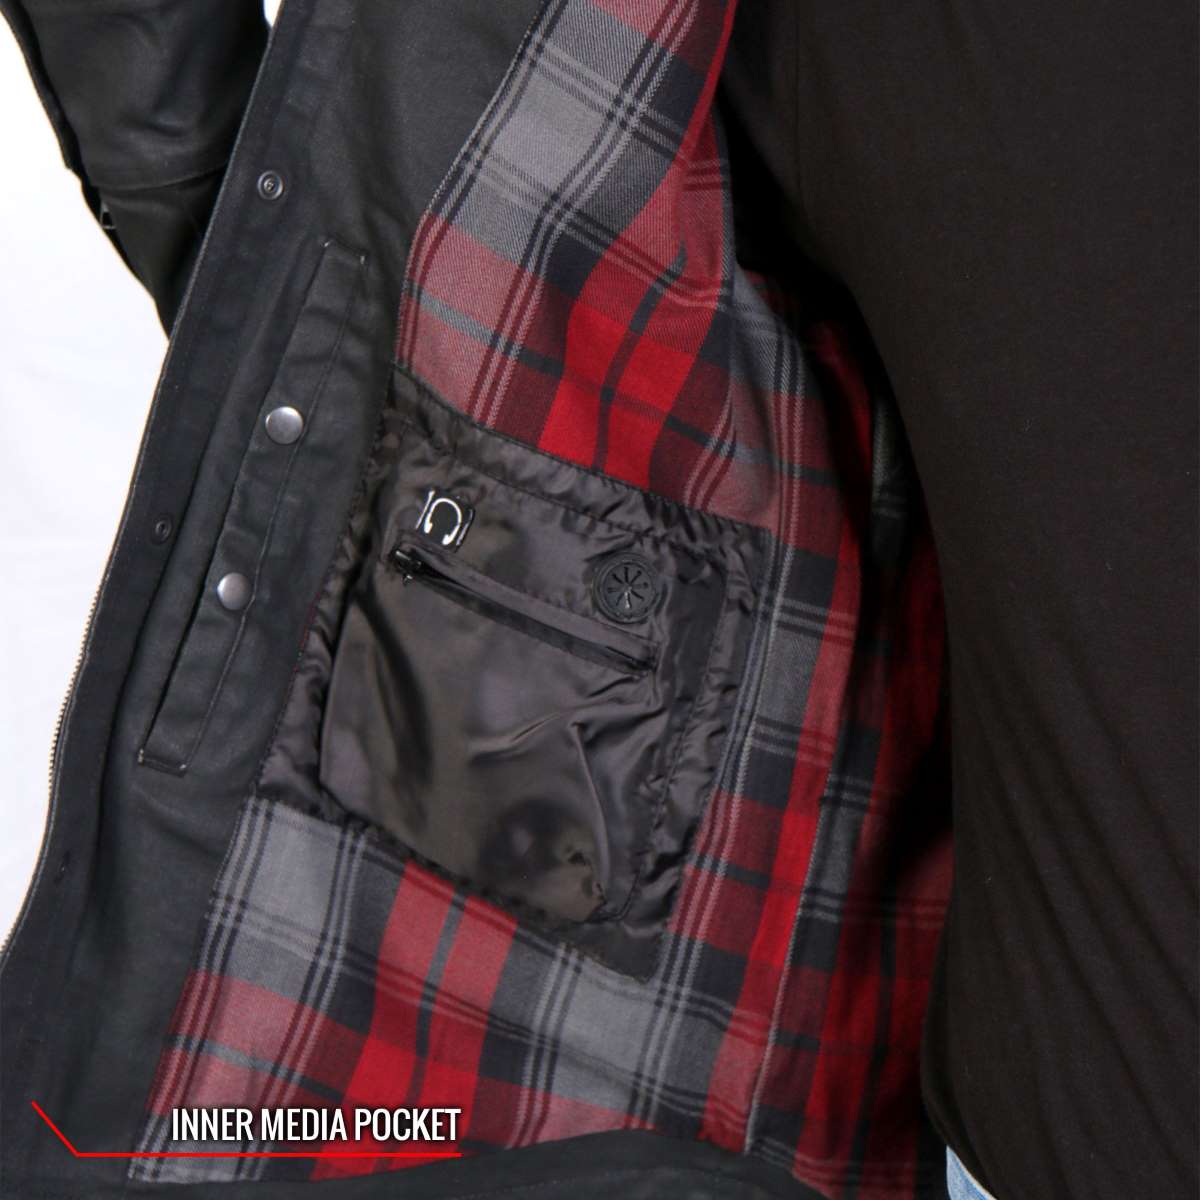 Hot Leathers JKM6003 Men's Black Waxed Cotton Concealed Carry Motorcycle Casual Shirt Jacket